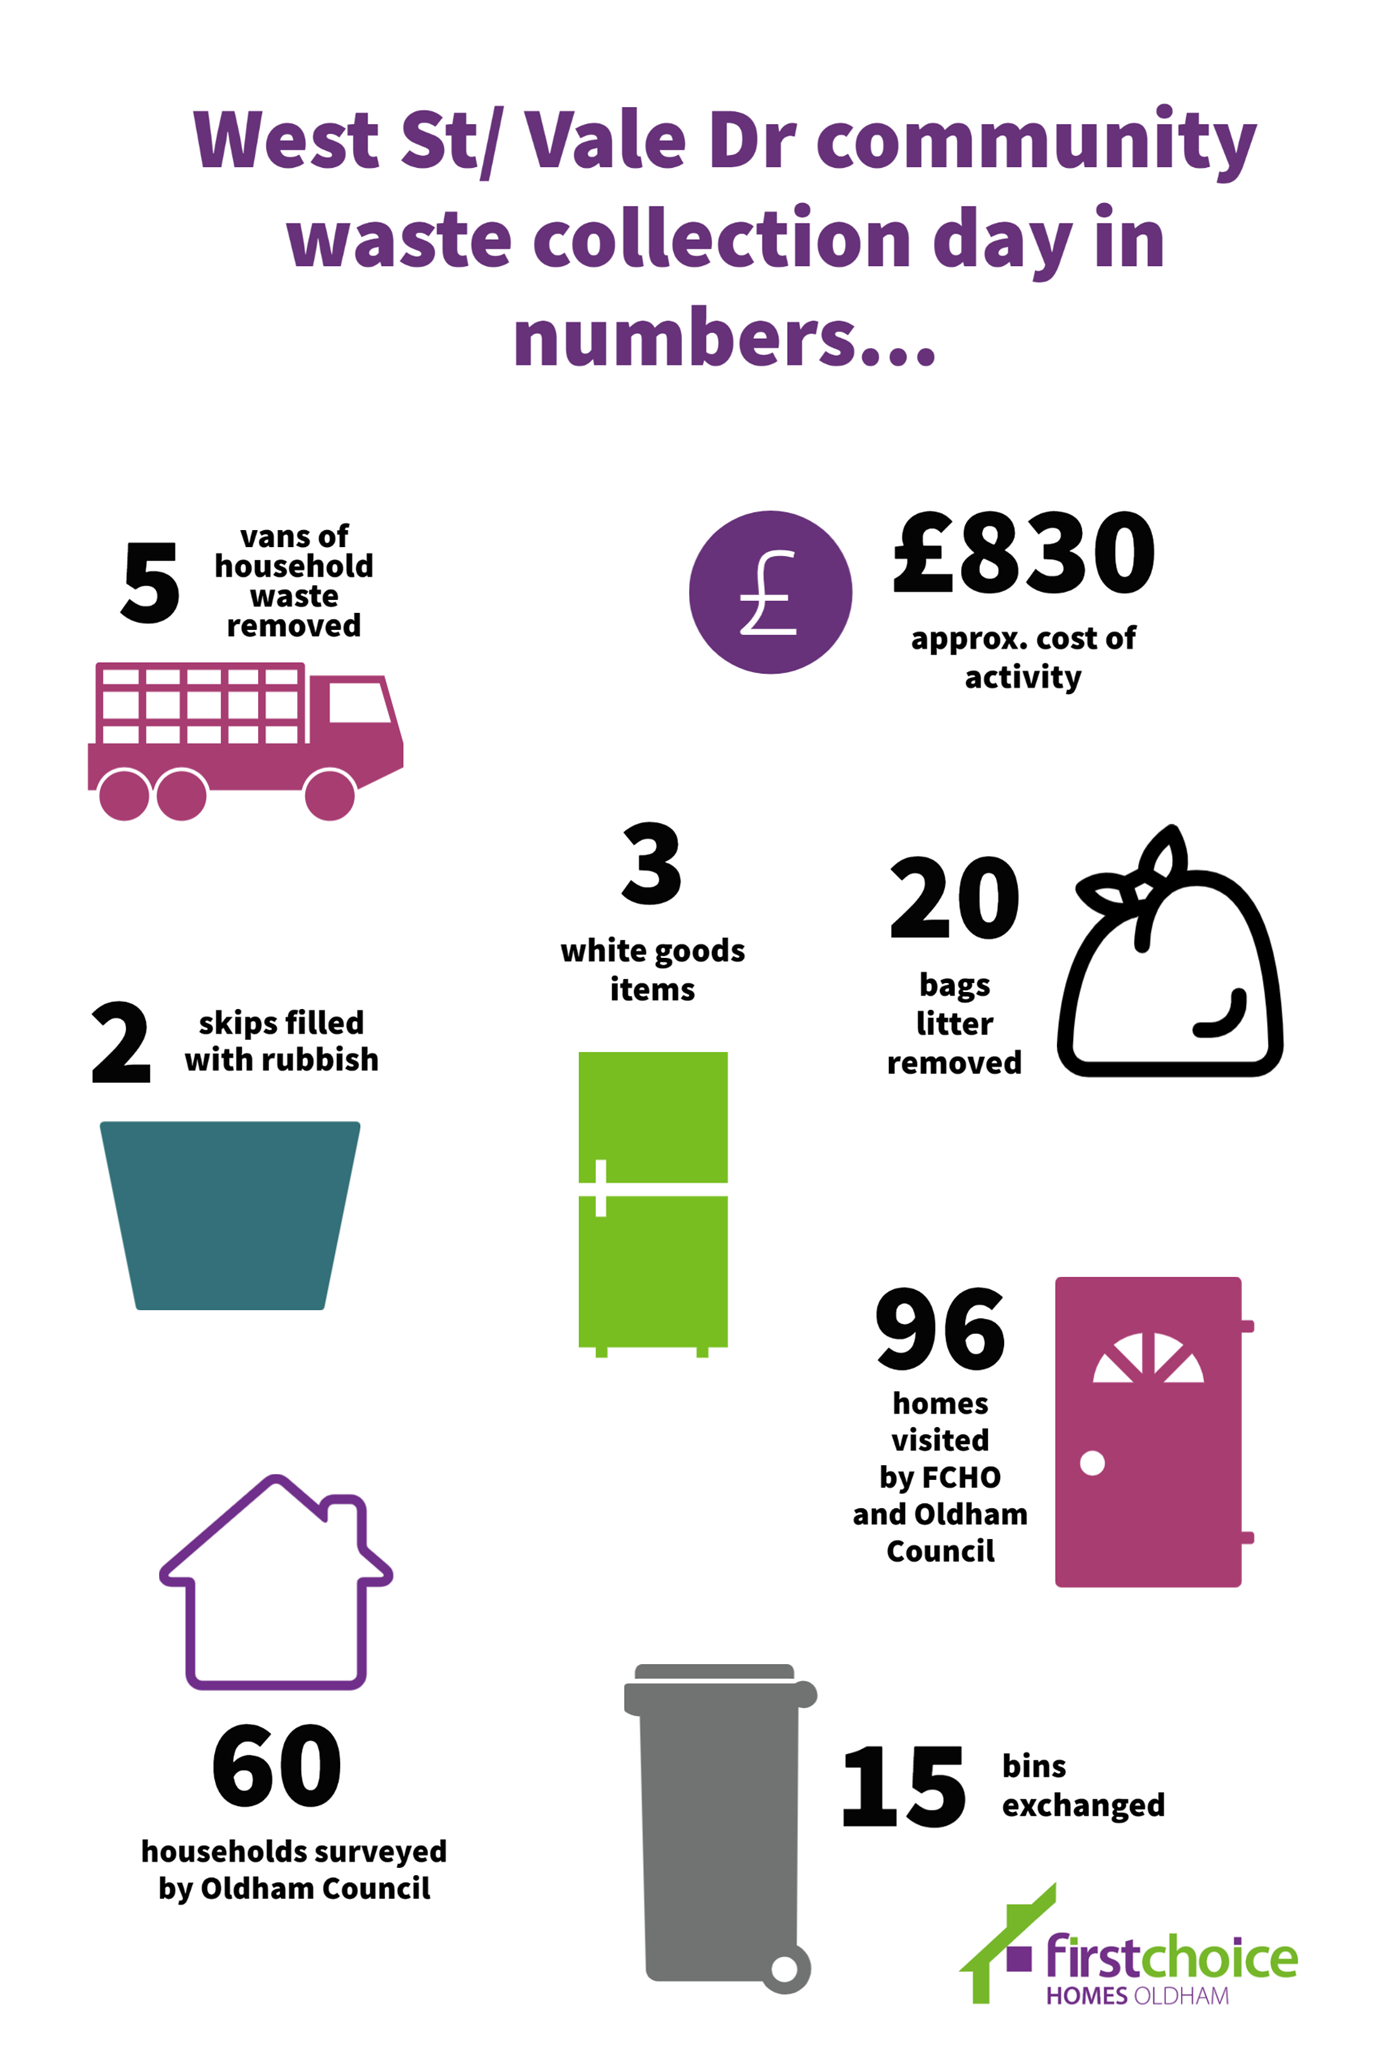 Infographic to show what FCHO achieved at its community waste collection day at West St/ Vale Dr, Coldhurst